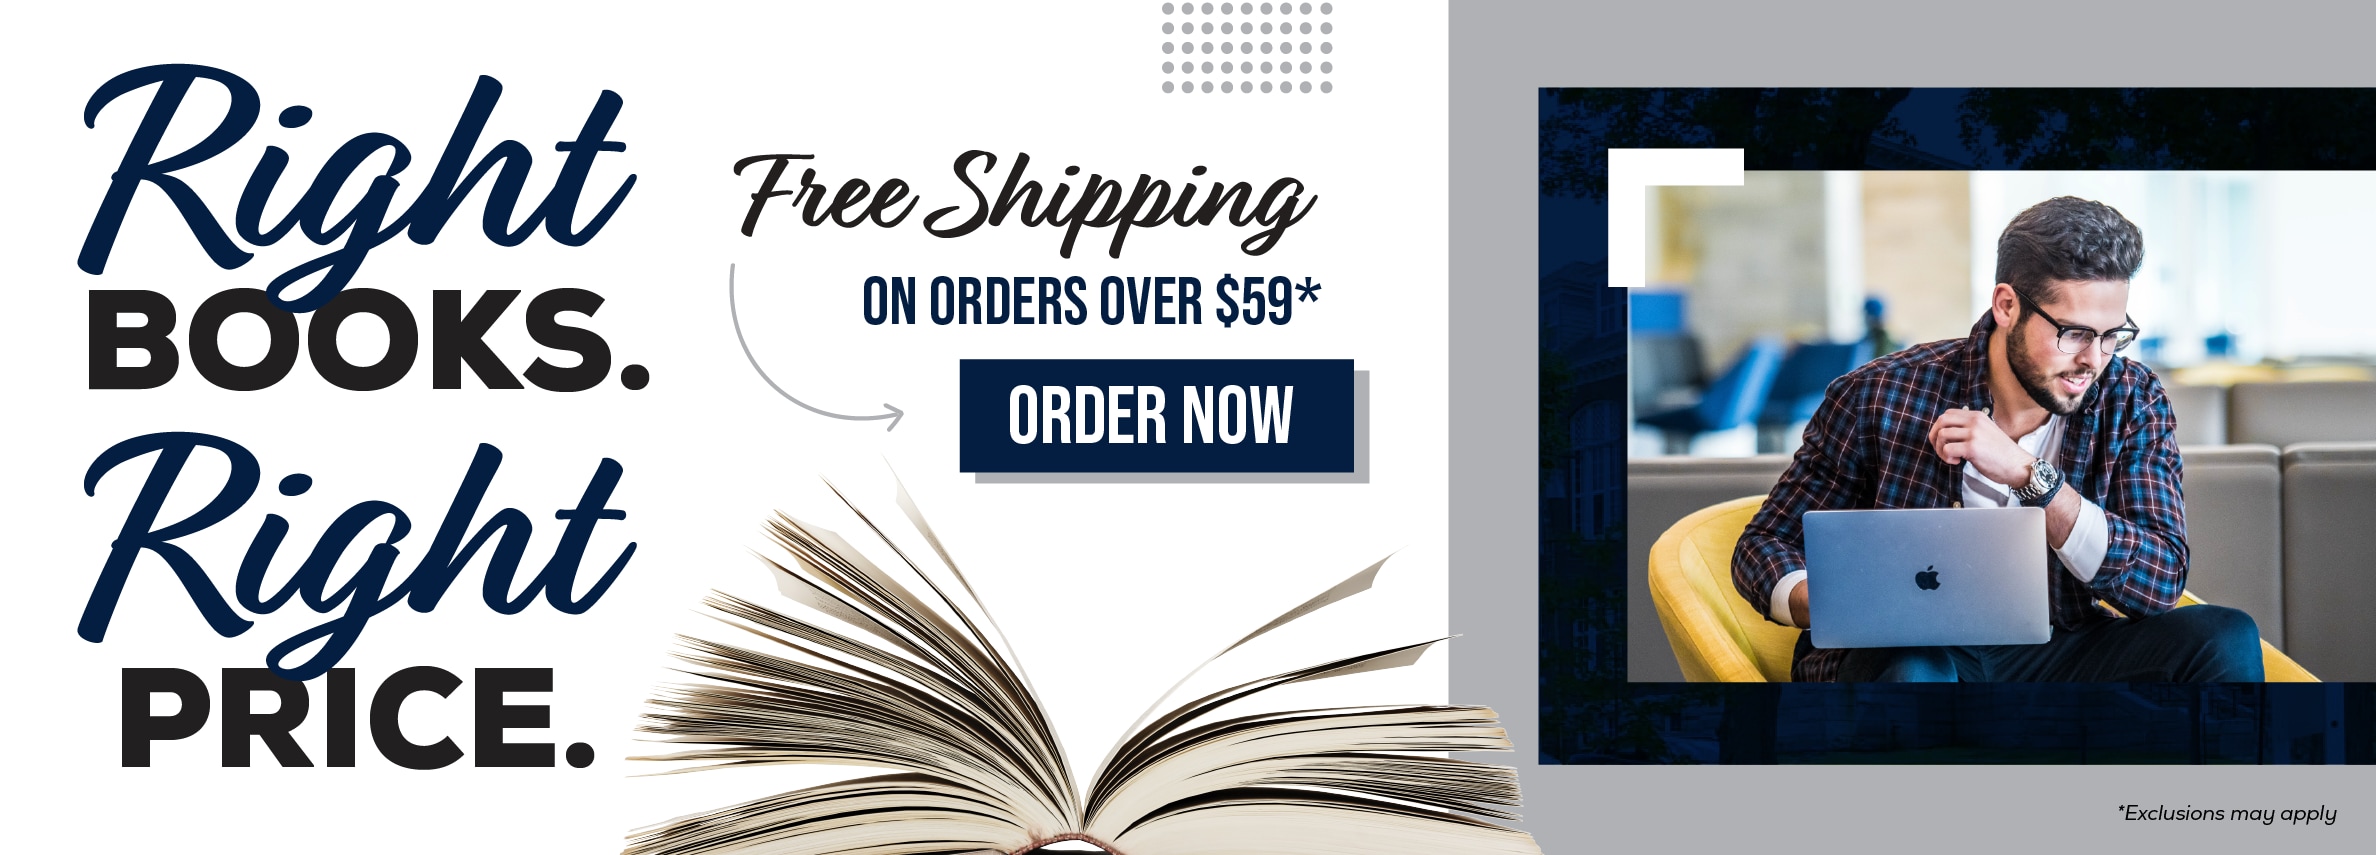 Right books. Right price. Free shipping on orders over $59* Order now. *Exclusions may apply.